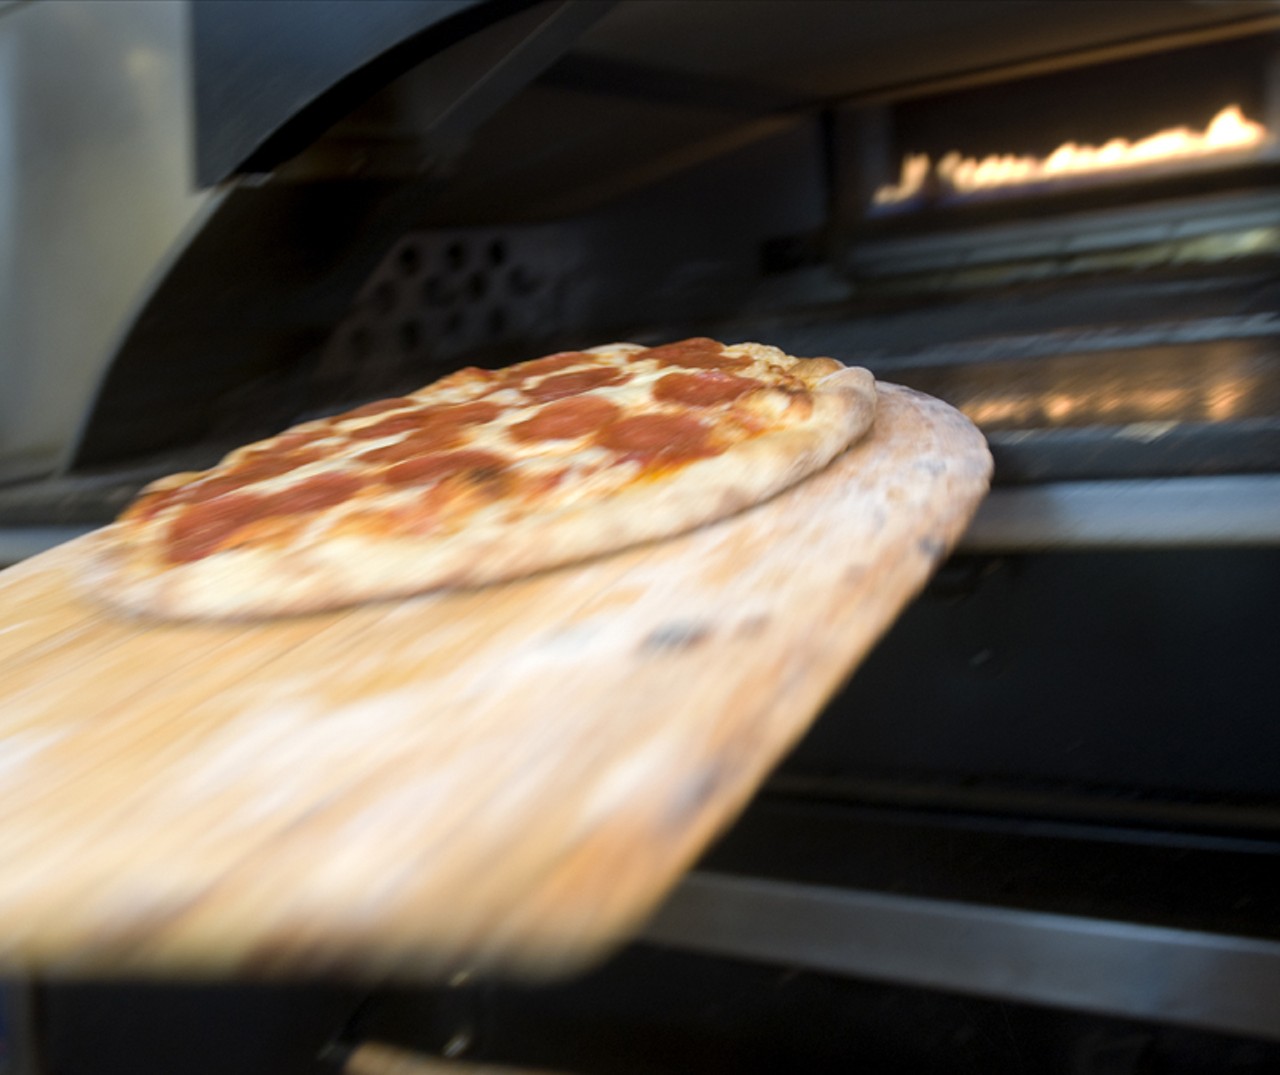 The pepperoni pizza makes its way from the lower oven to the top oven for the final browning effect.